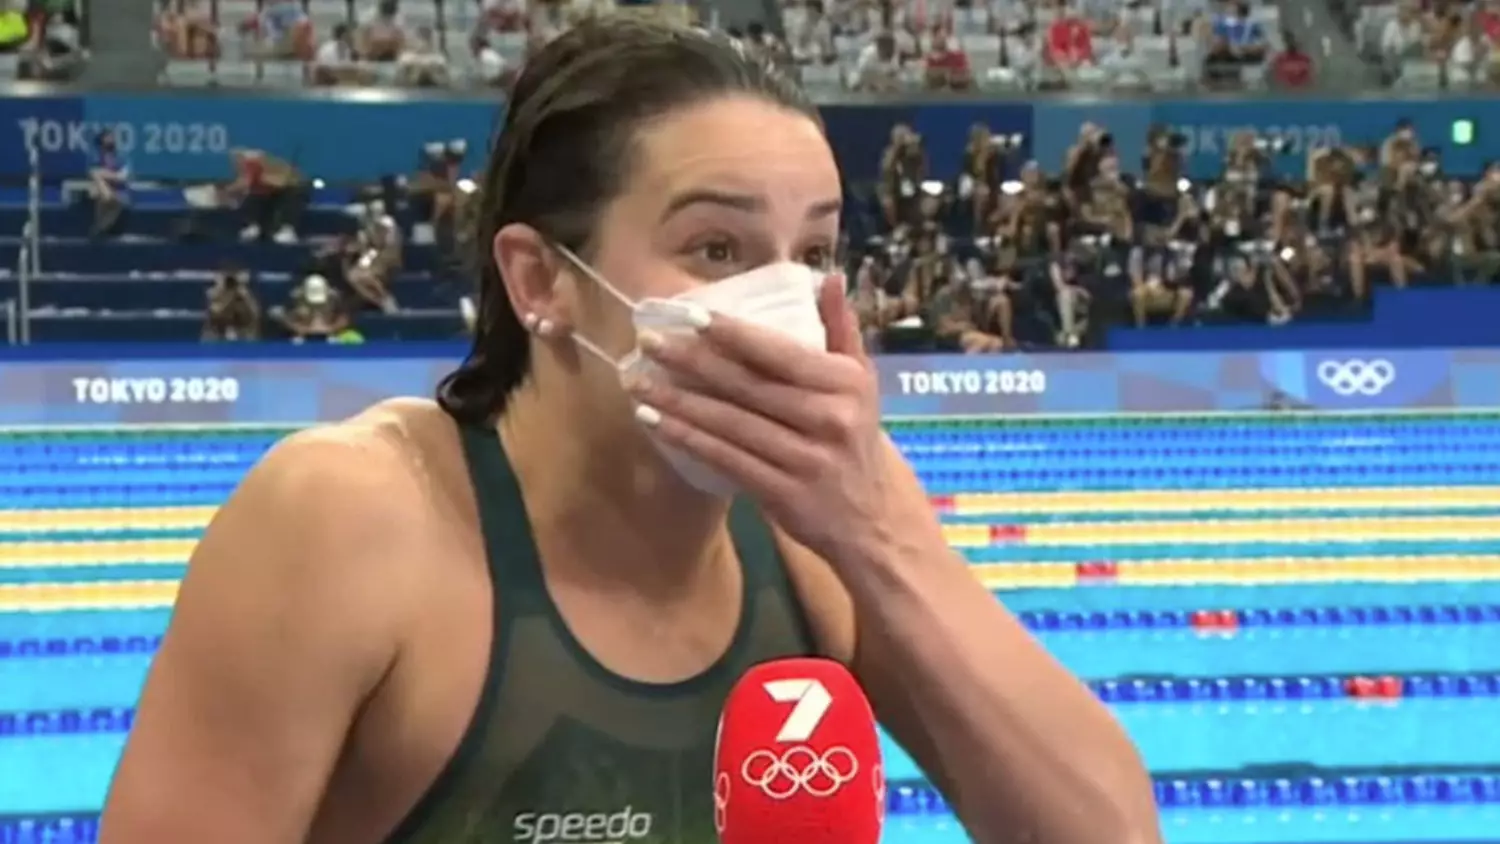 'F**k Yeah': Aussie Swimmer Gives X-Rated Answer During Interview After Winning Gold